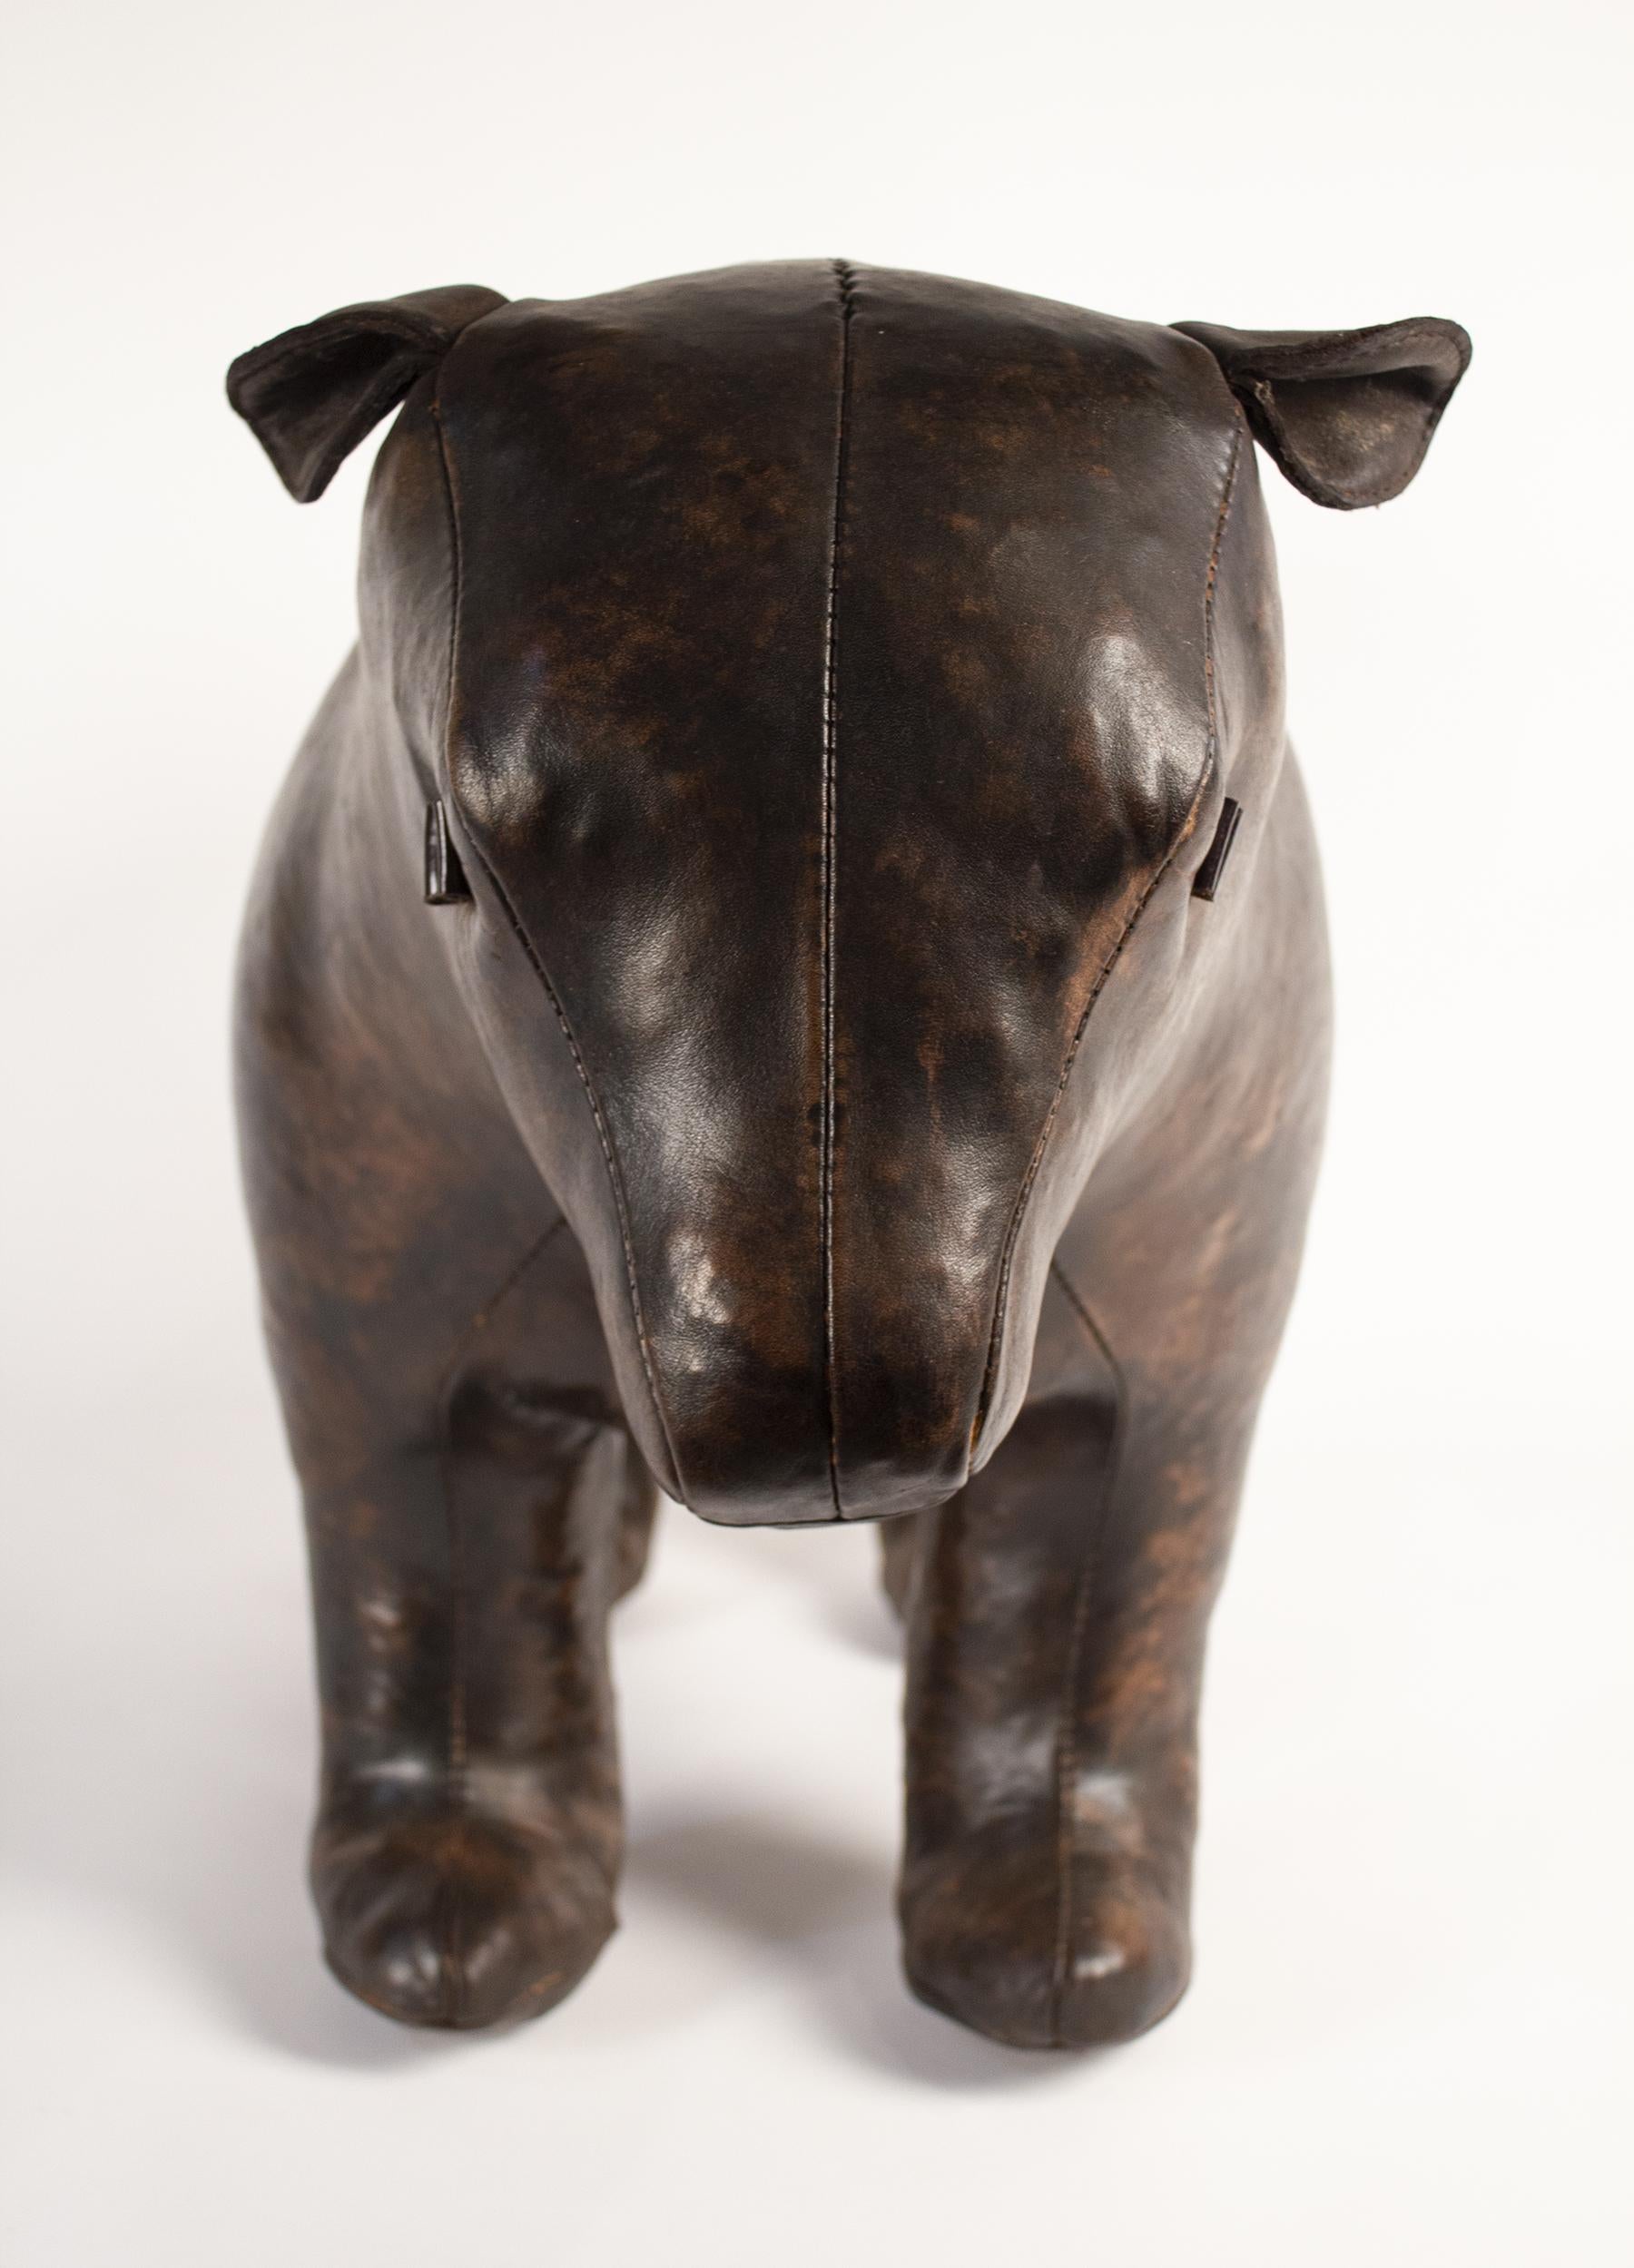 Mid-Century Modern Omersa Bear Sculpture / Footstool in Leather By Dimitri Omersa